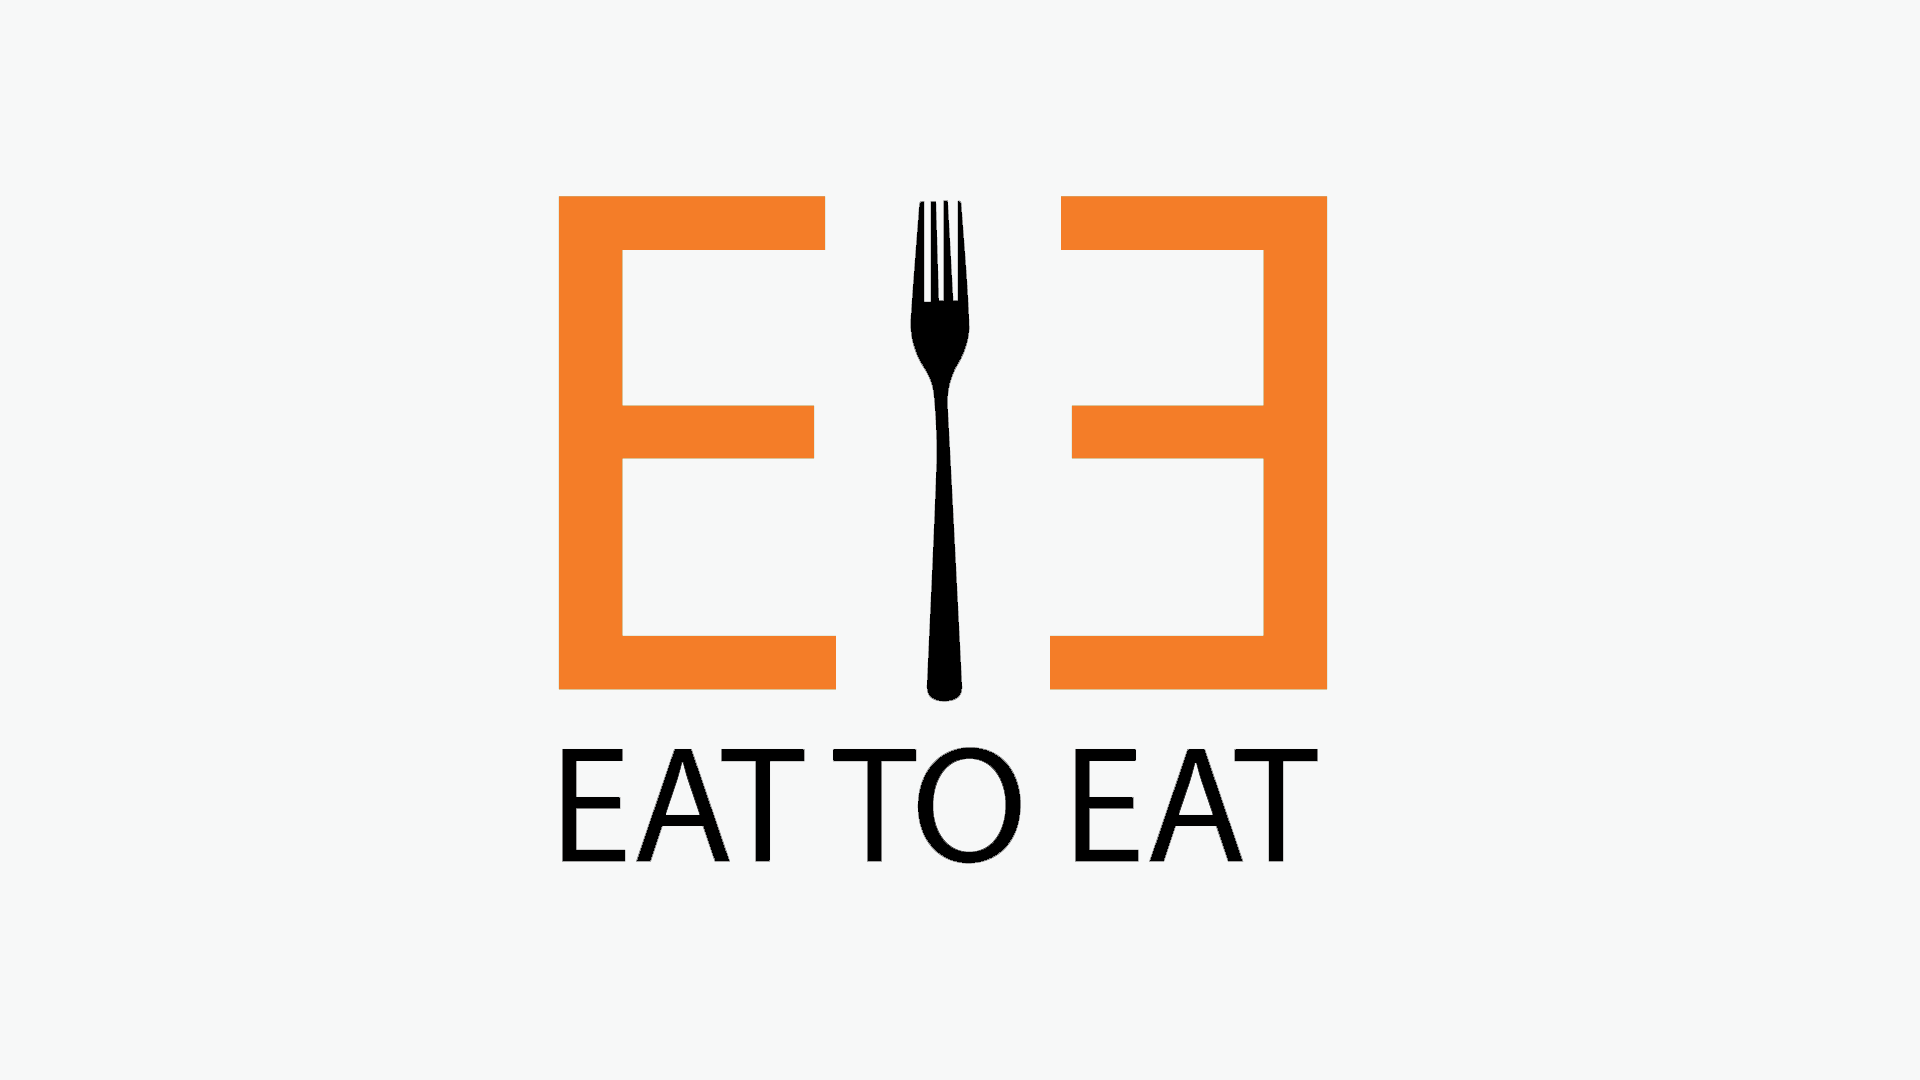 Find Healthy, Homemade Dishes For A Great Price On The Eat To Eat App!